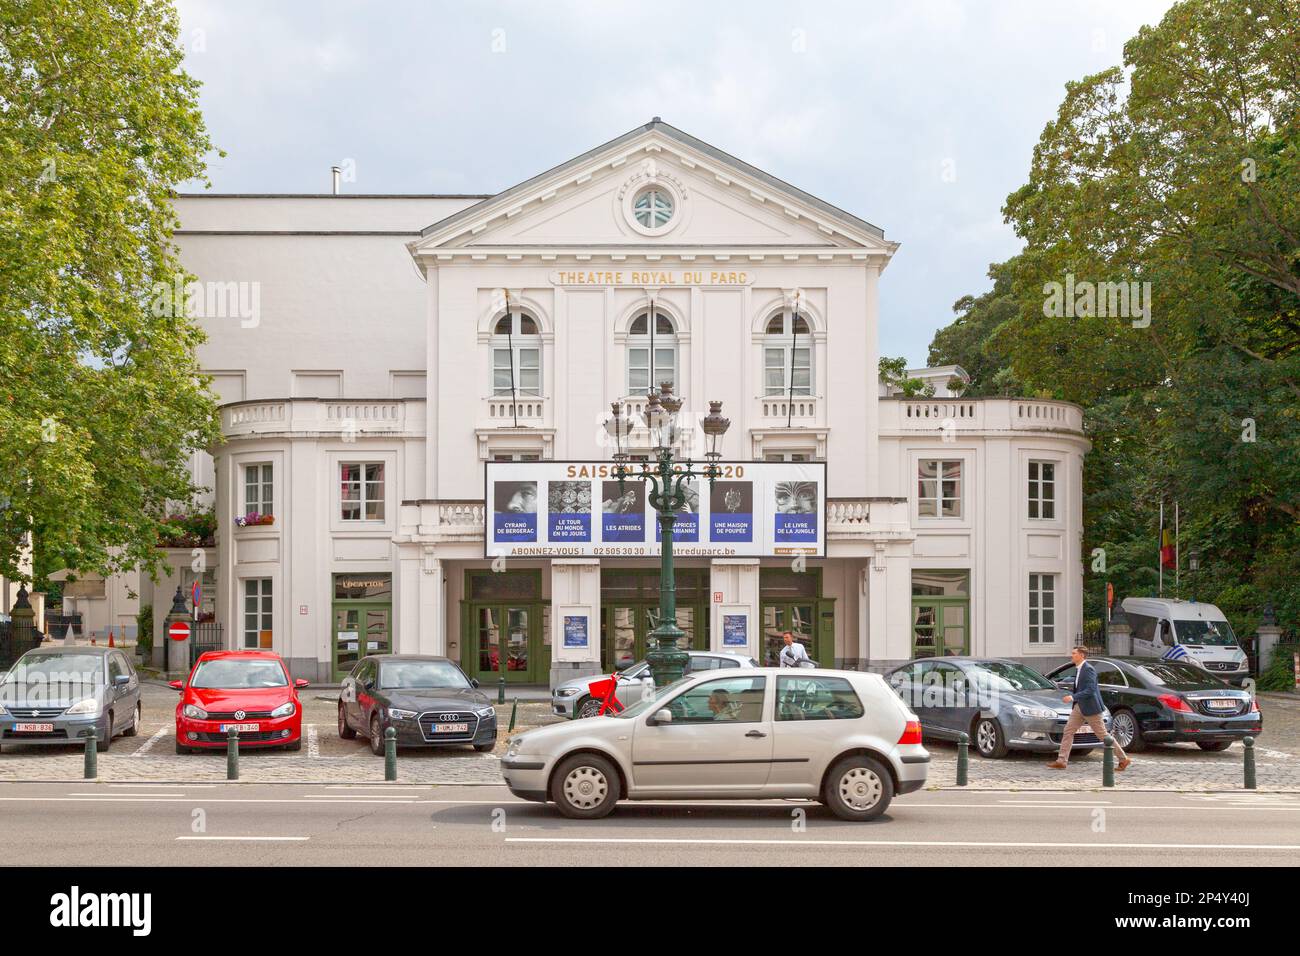 Brussels, Belgium - July 02 2019: The Royal Park Theatre (French: Théâtre Royal du Parc) is a stage theater, opened in 1782, with a marble lobby area Stock Photo